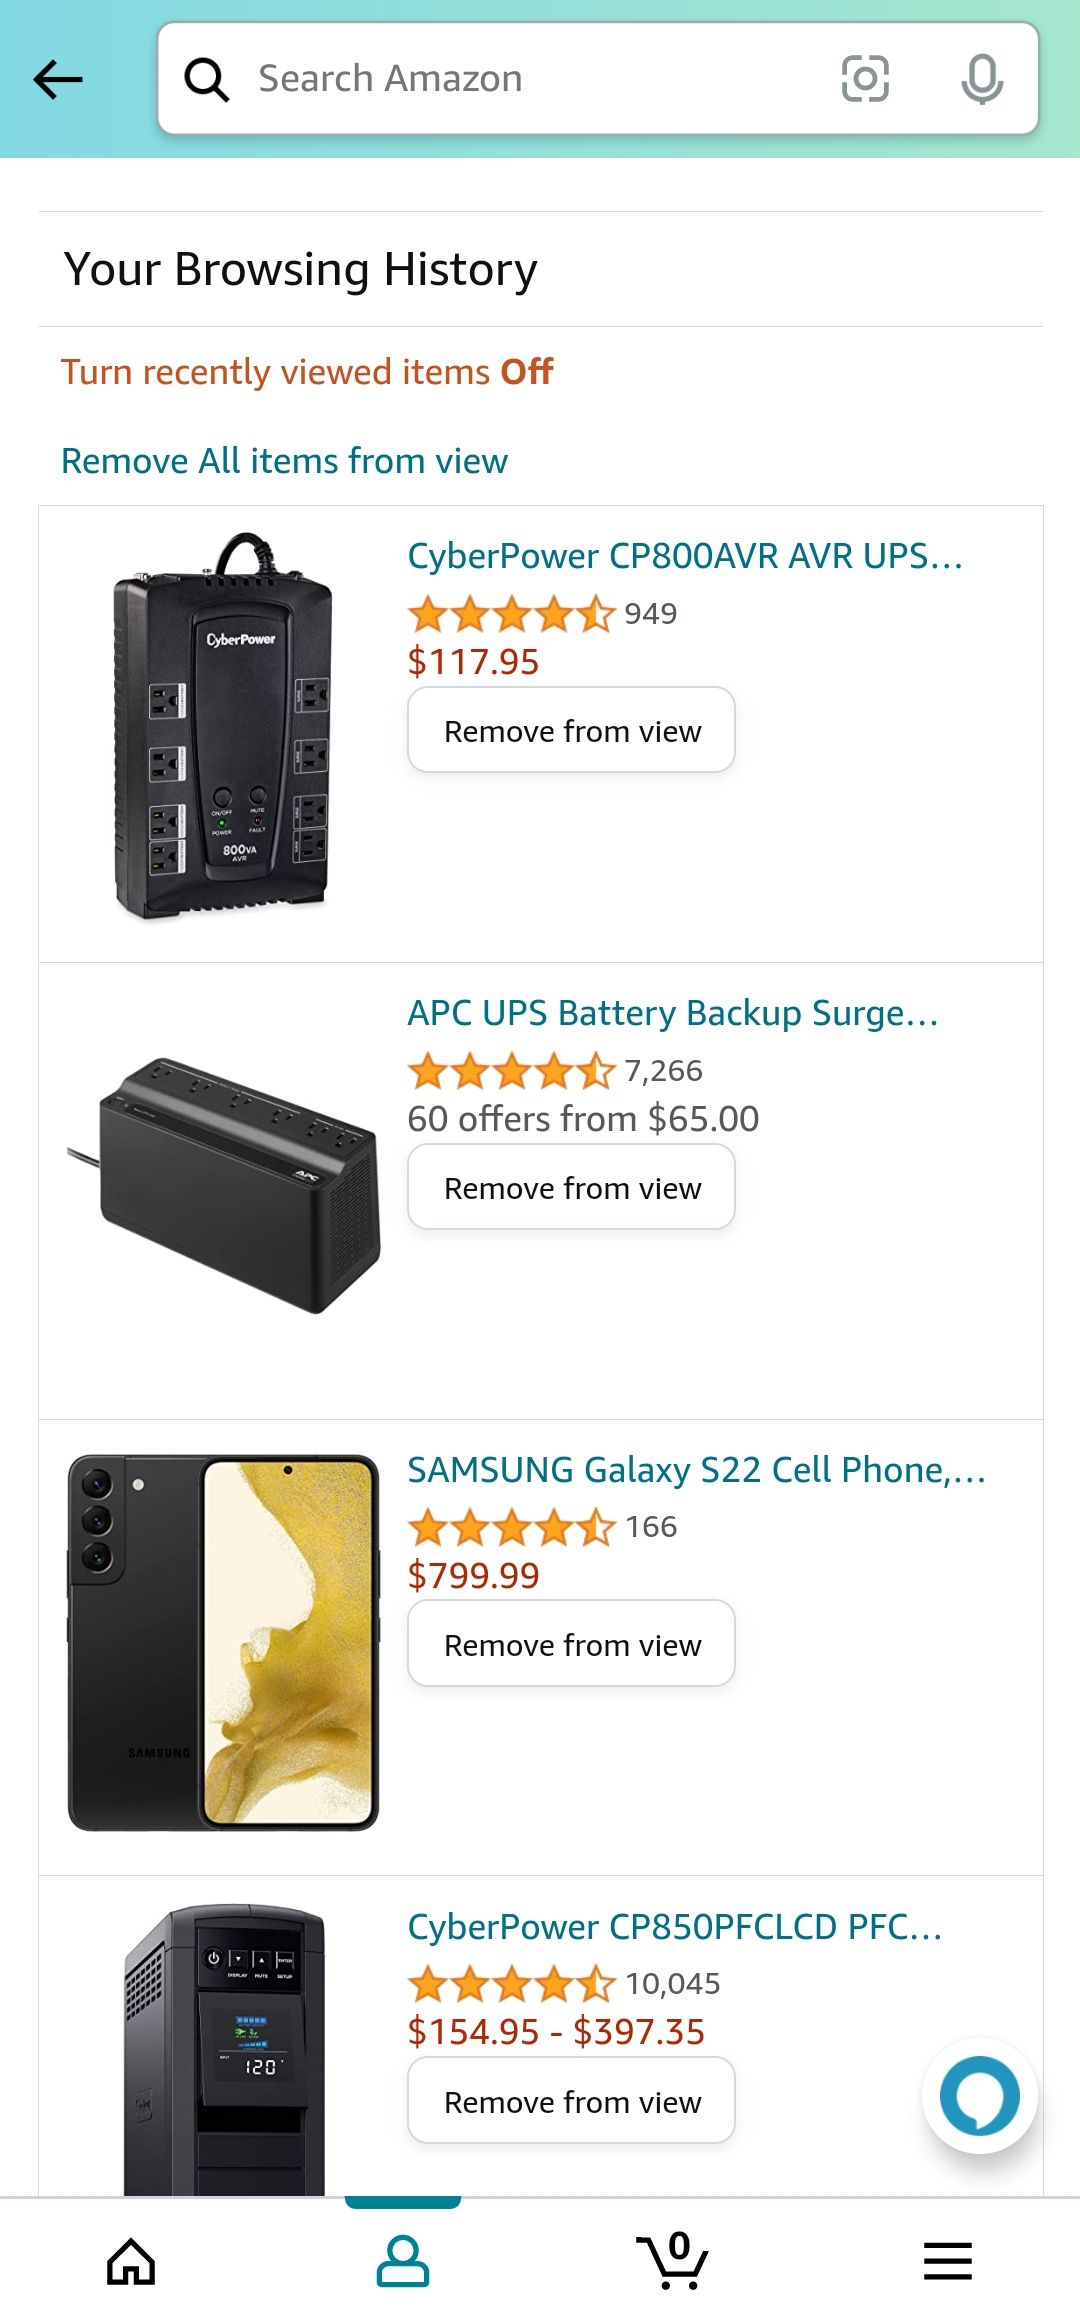 Amazon mobile history page showing Turn recently viewed items off button